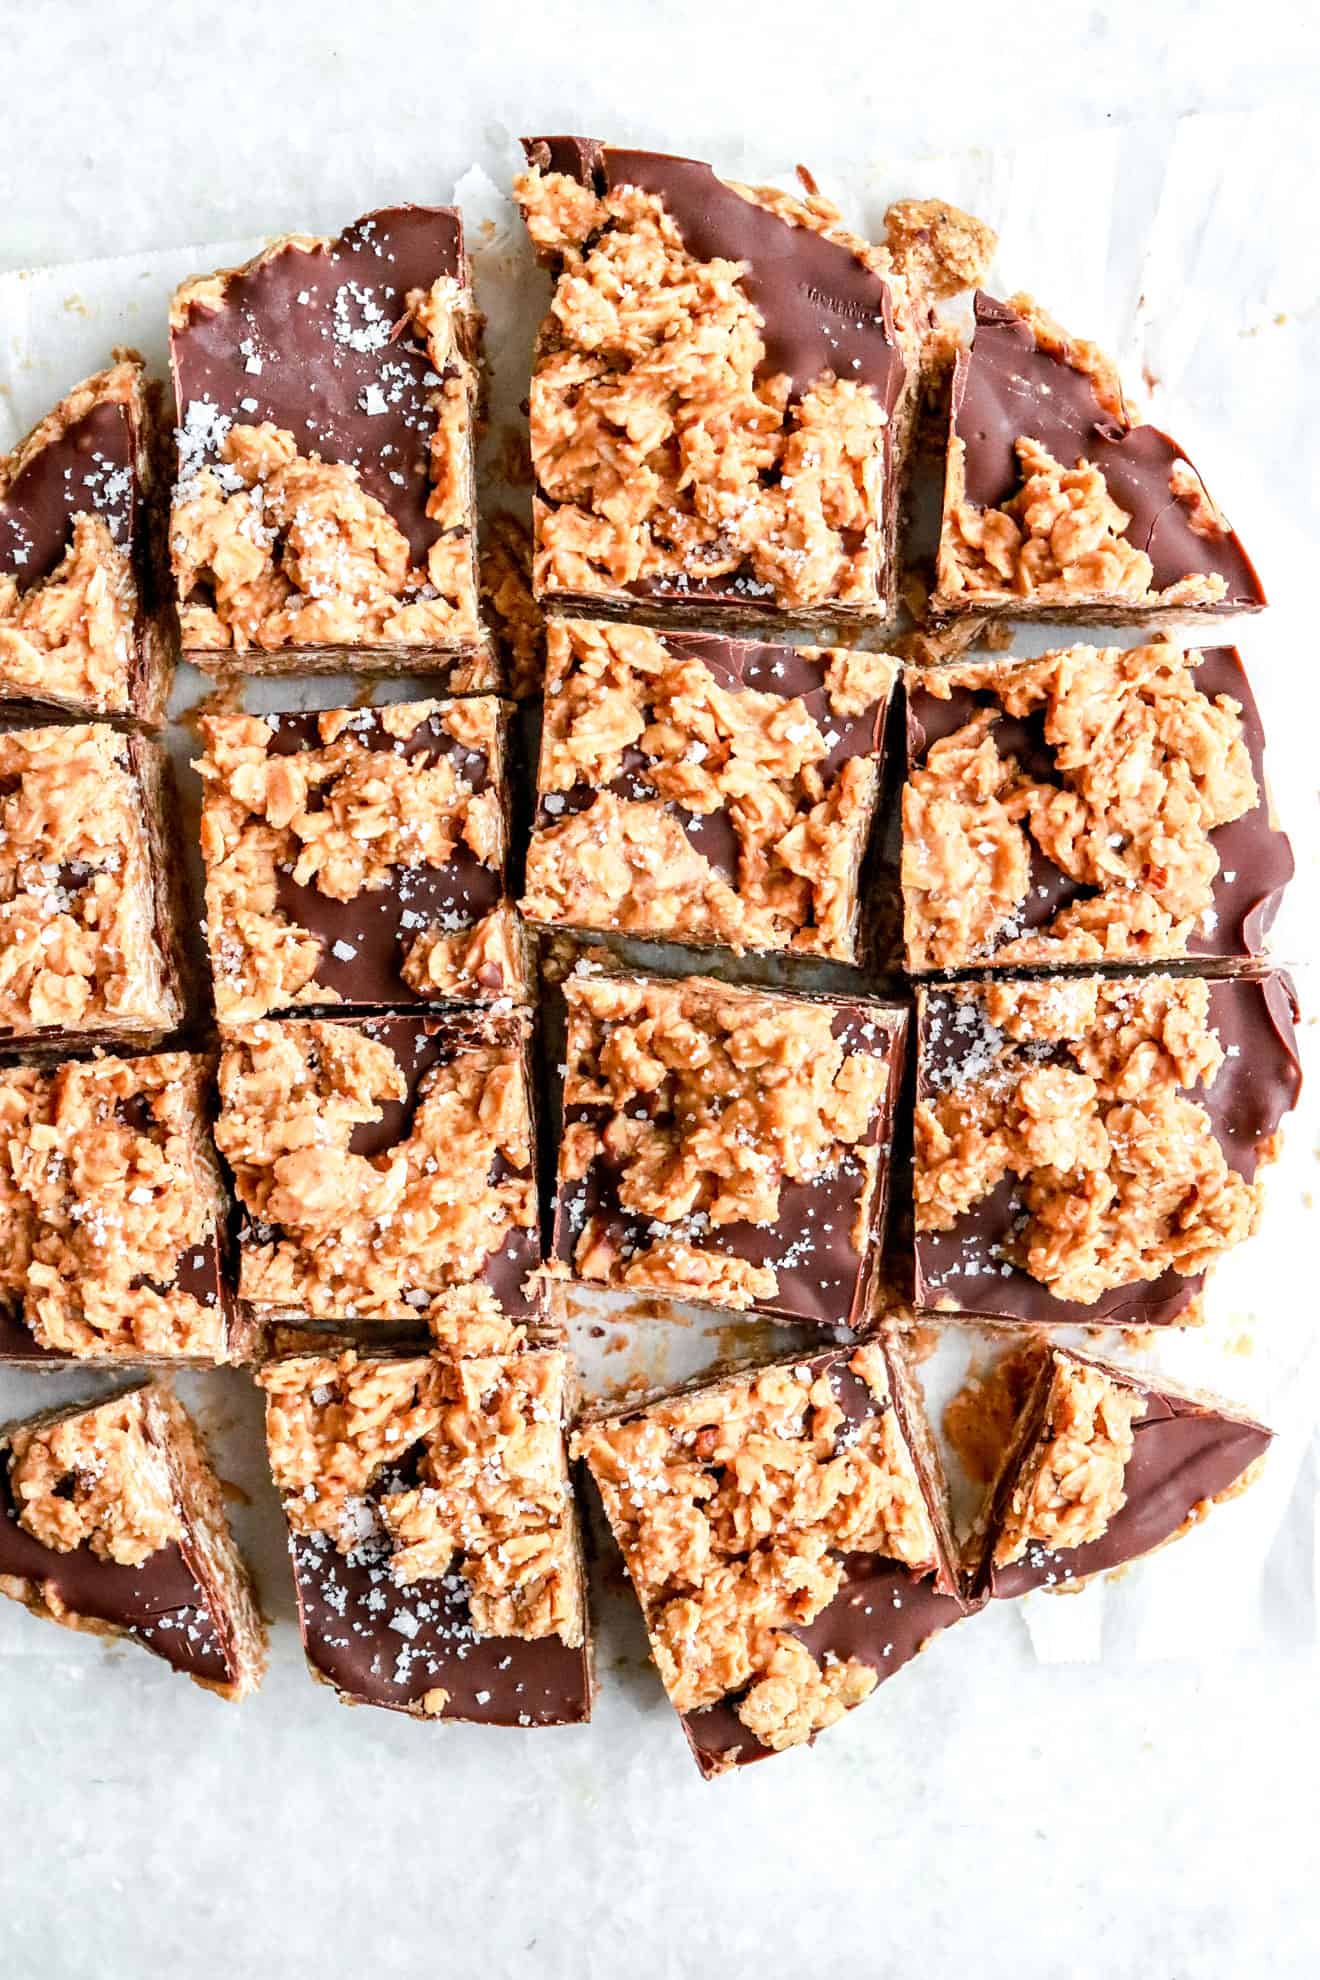 This is an overhead image of oatmeal squares on a white background. The squares have a visible hardened chocolate layer and crumbled oatmeal on top, sprinkled with flakey salt. 